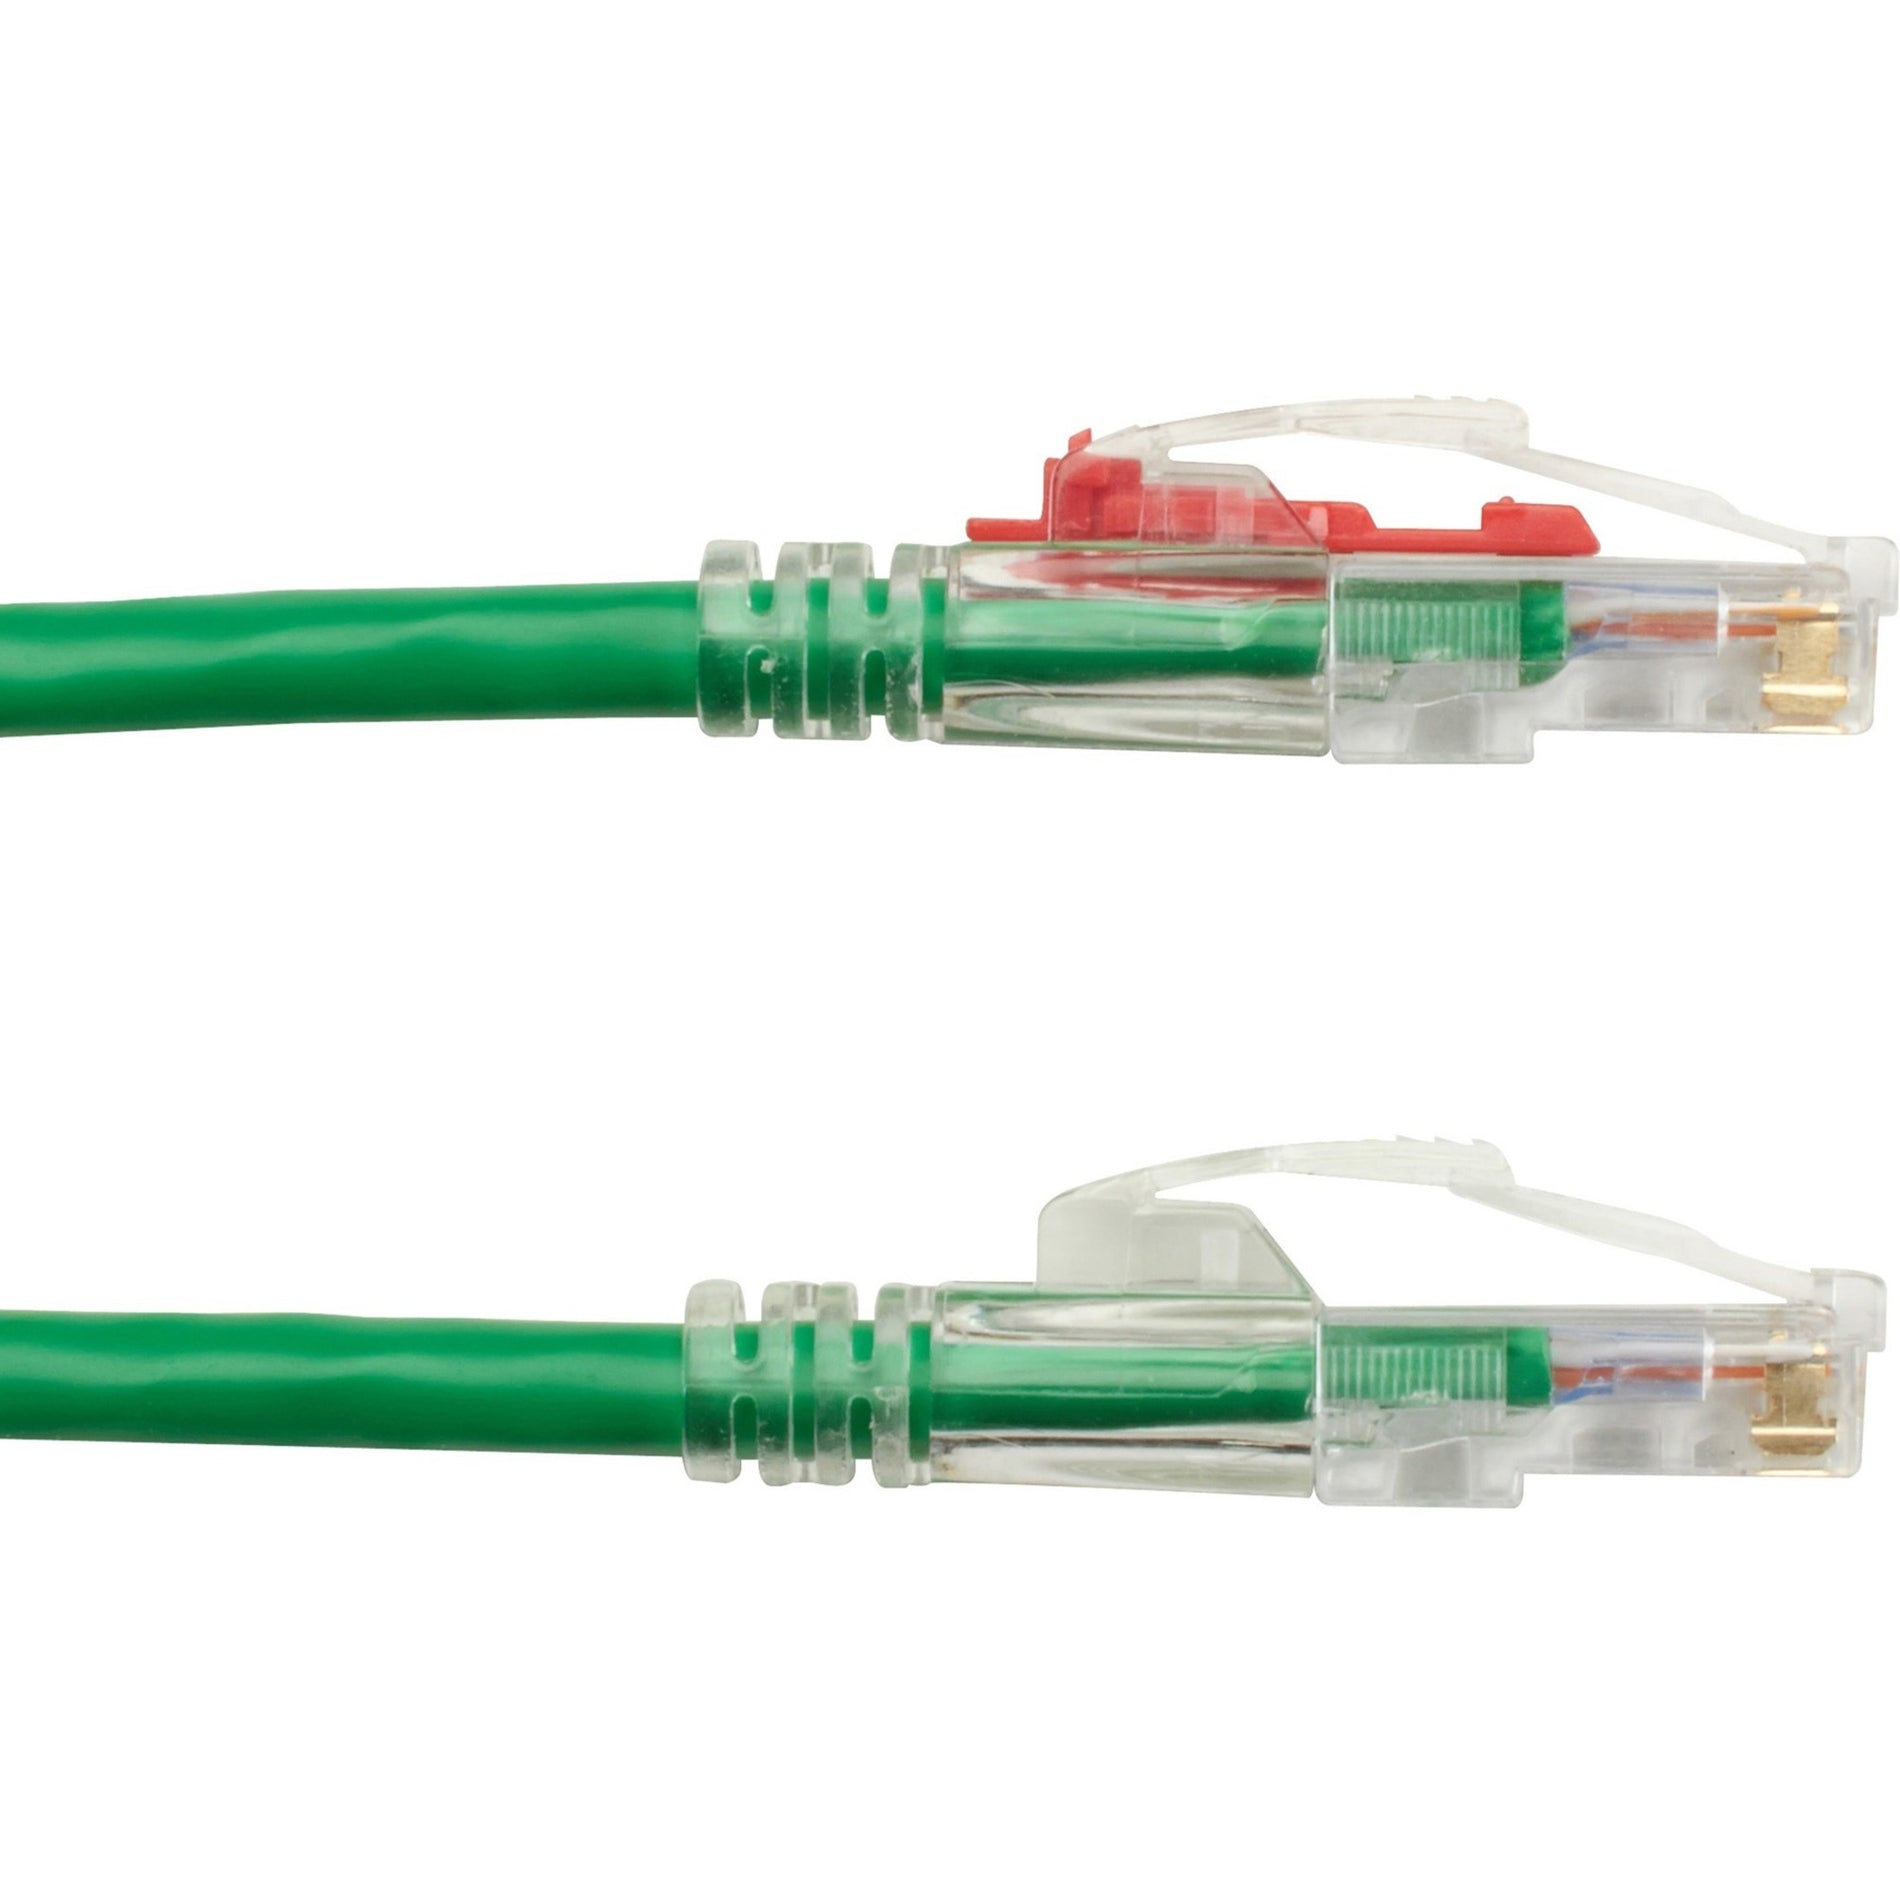 Black Box C6PC70-GN-10 GigaTrue 3 Cat.6 UTP Patch Network Cable, 10 ft, Green